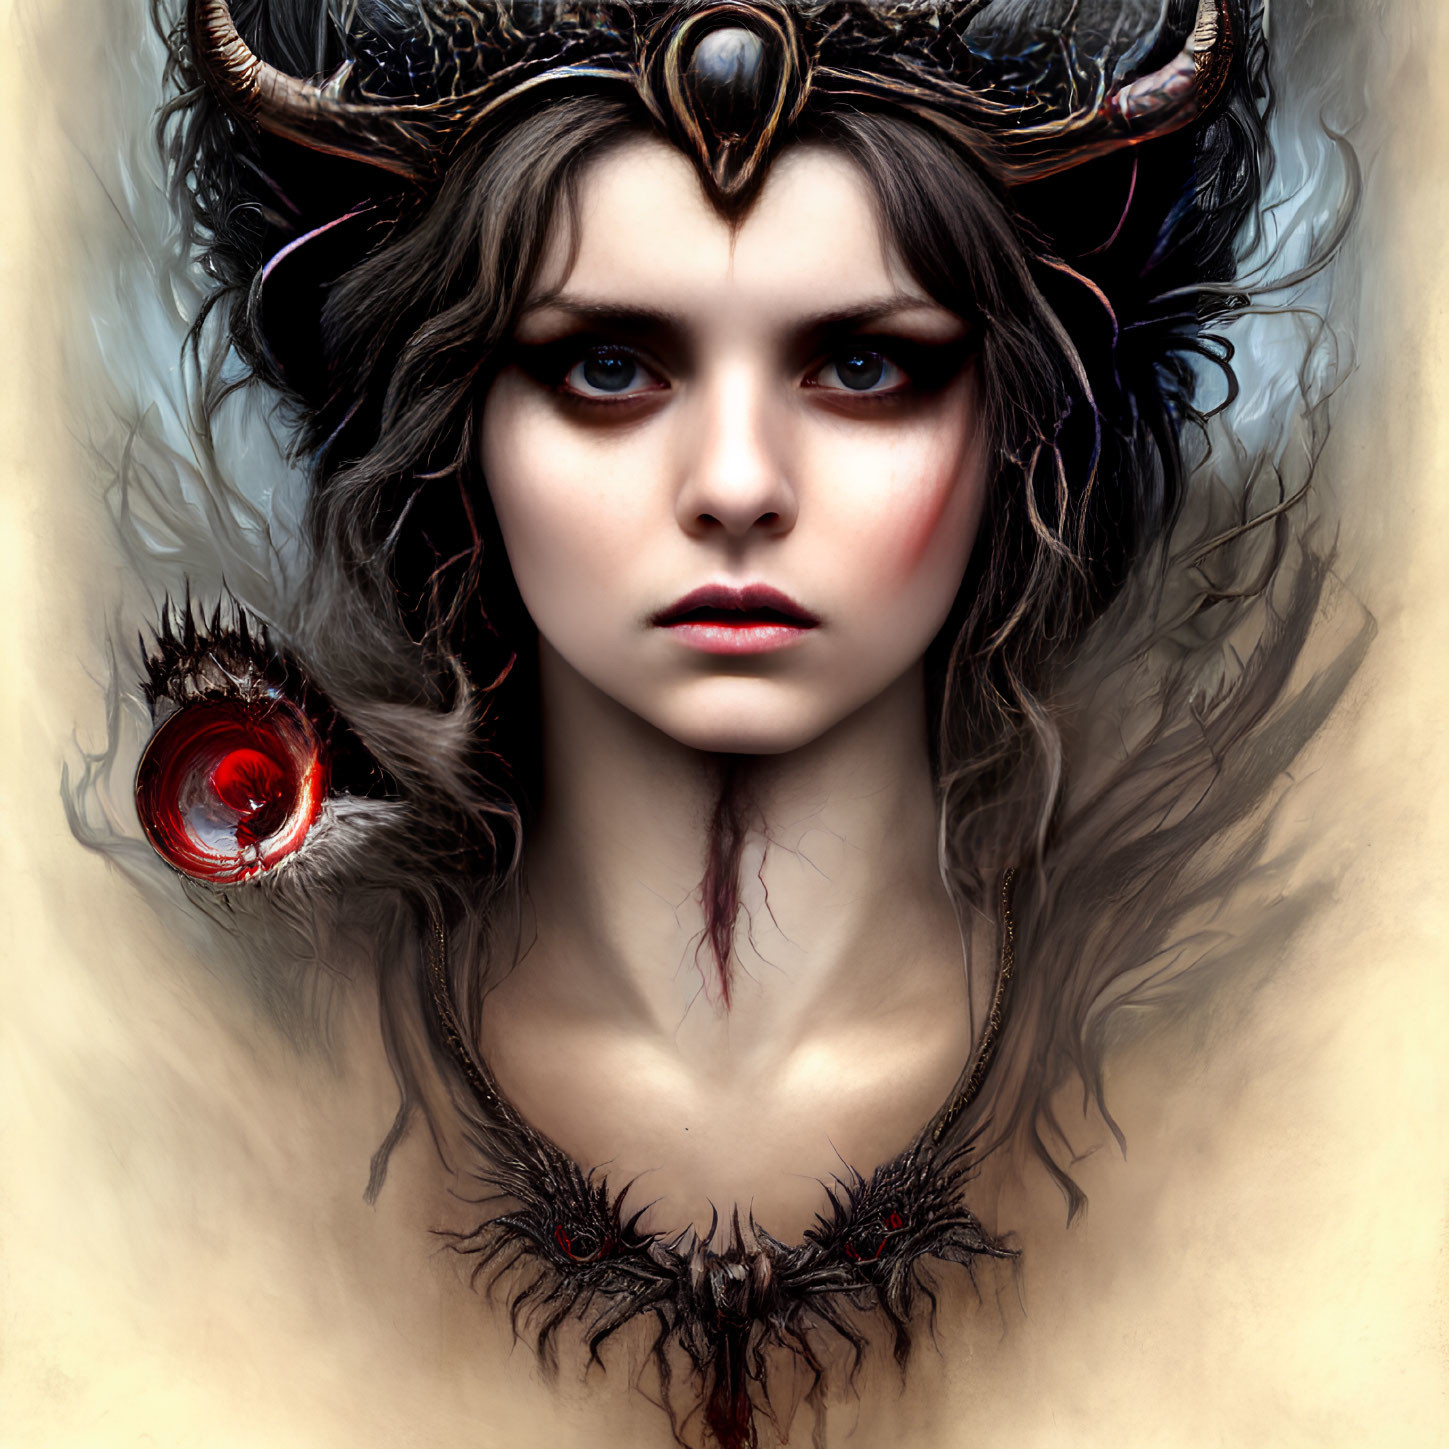 Dark-haired woman with horned headdress holding red orb - fantasy illustration